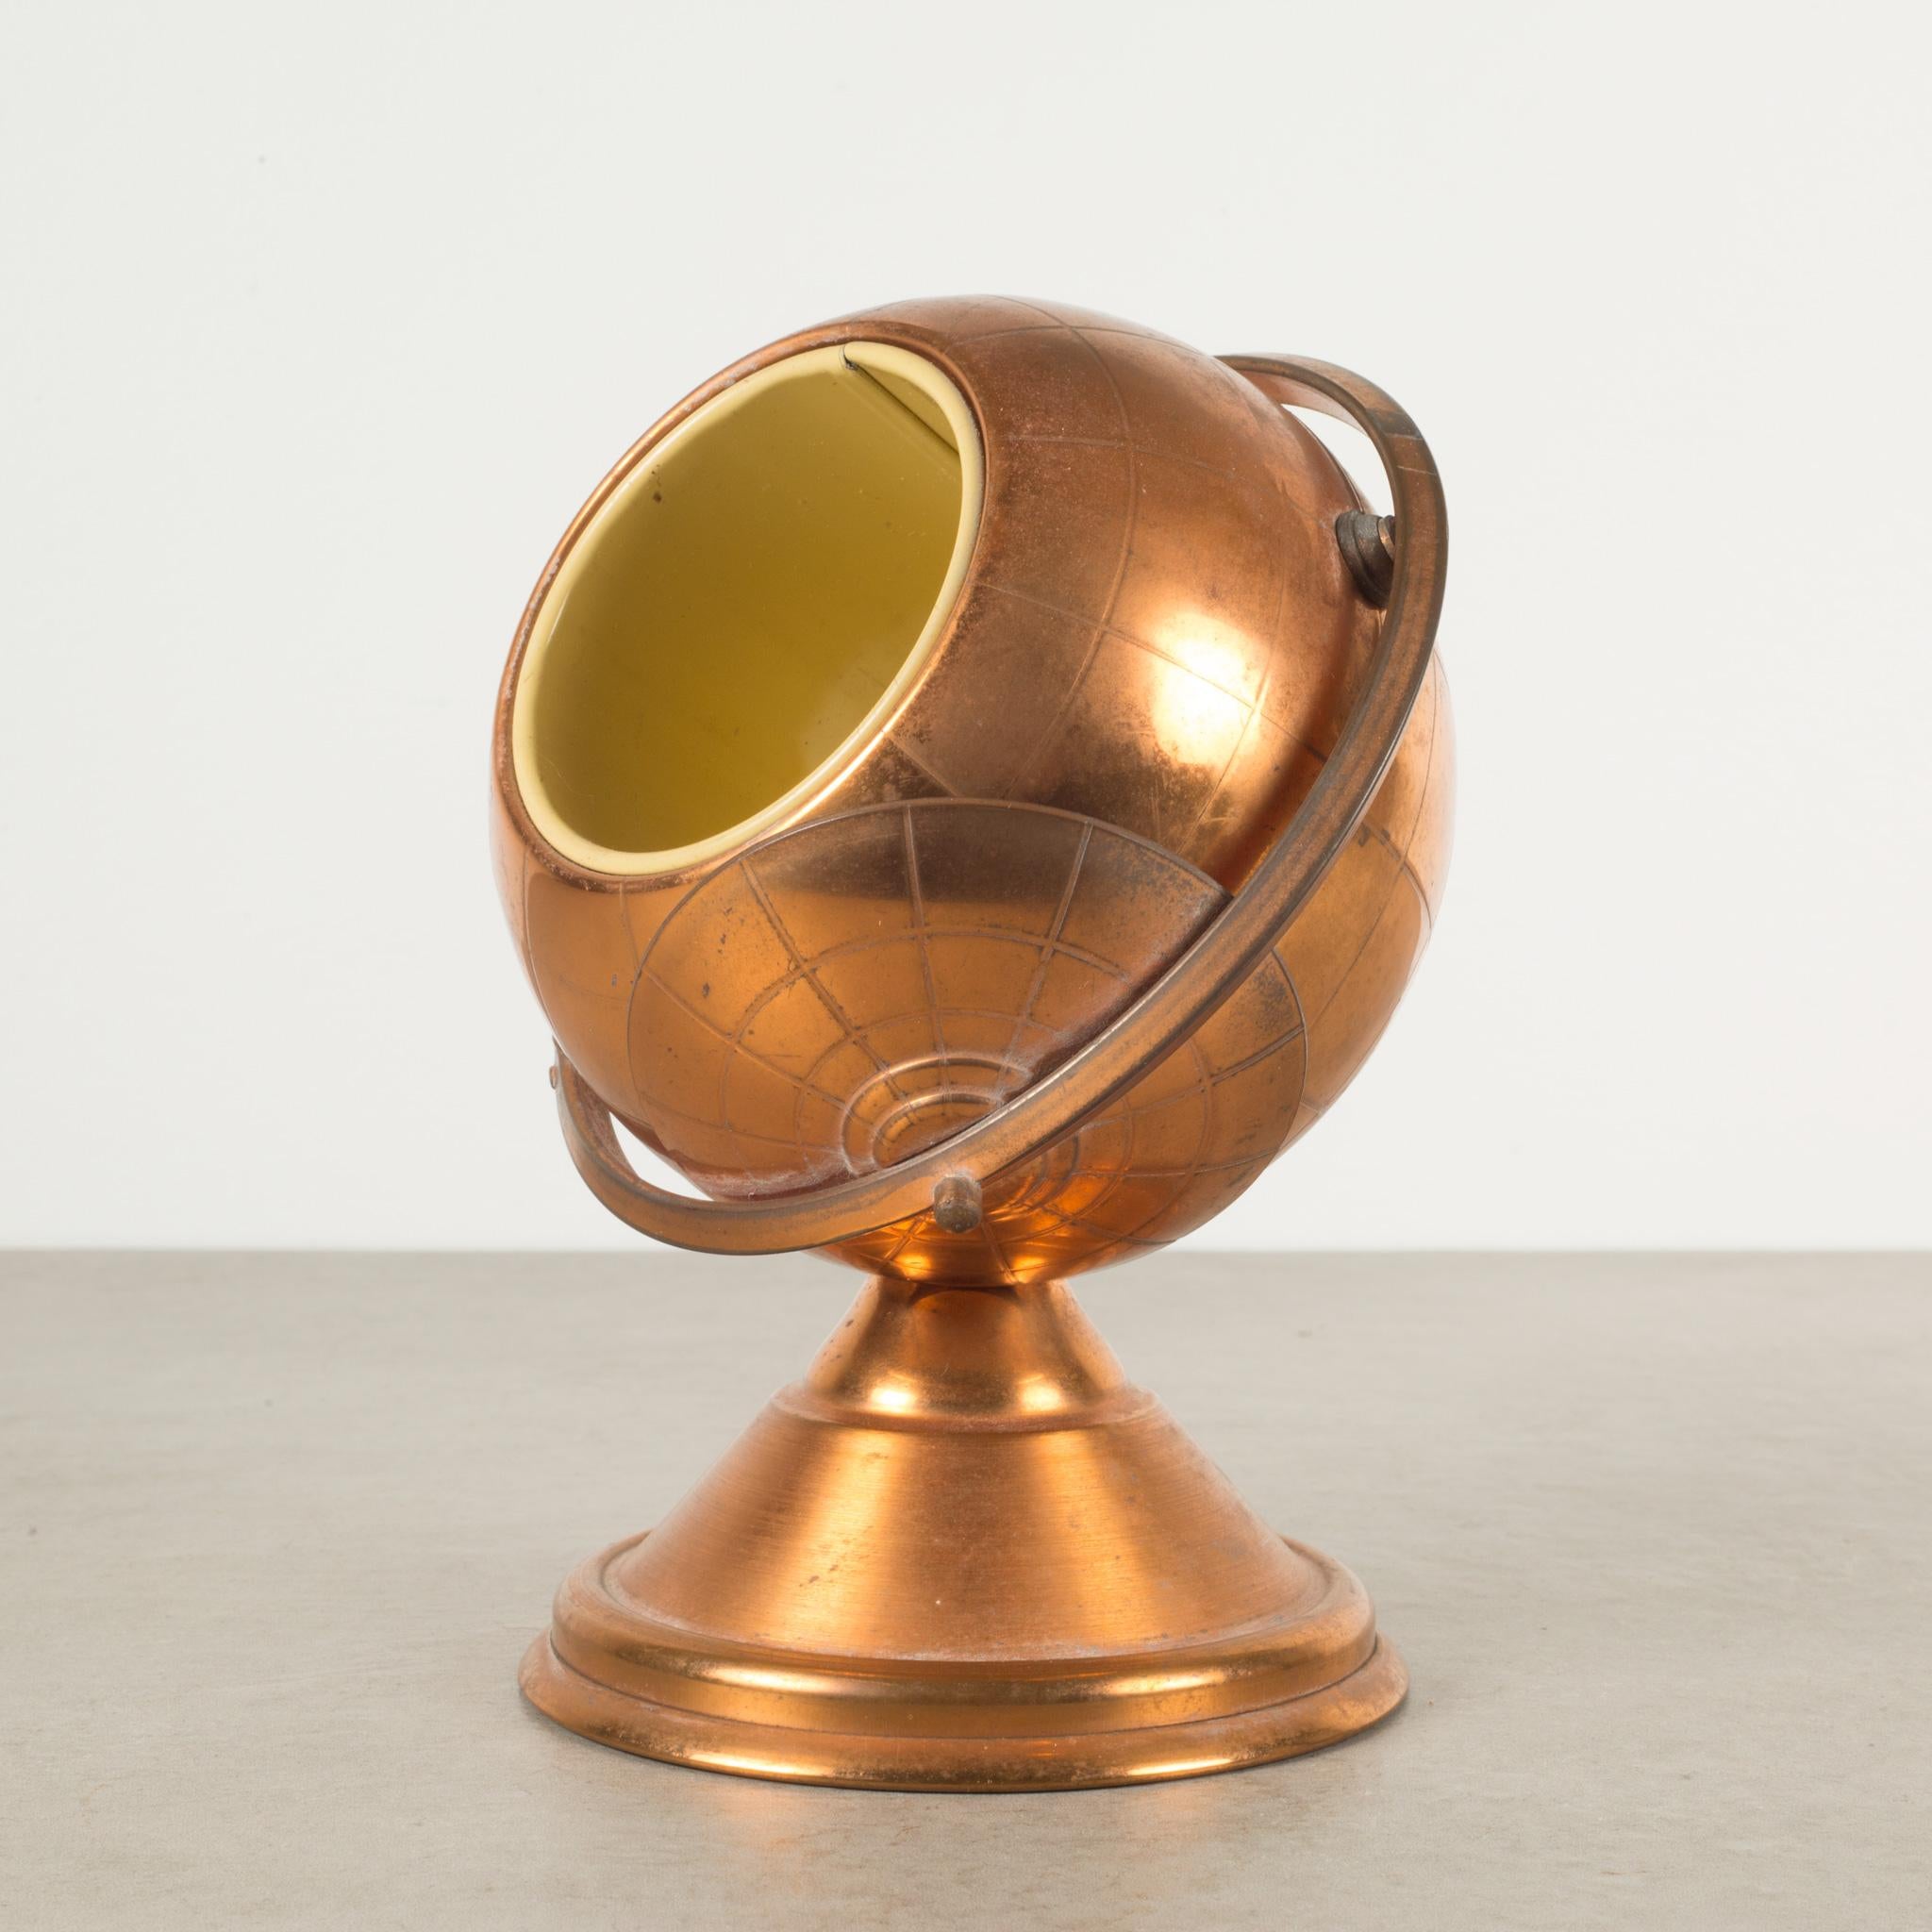 About

This is an original Mid-Century Modern copper cigarette holder. The lid slides open on the globe's axis to reveal a metal interior designed to hold cigarettes.

This piece has retained its original finish and has the appropriate finish for